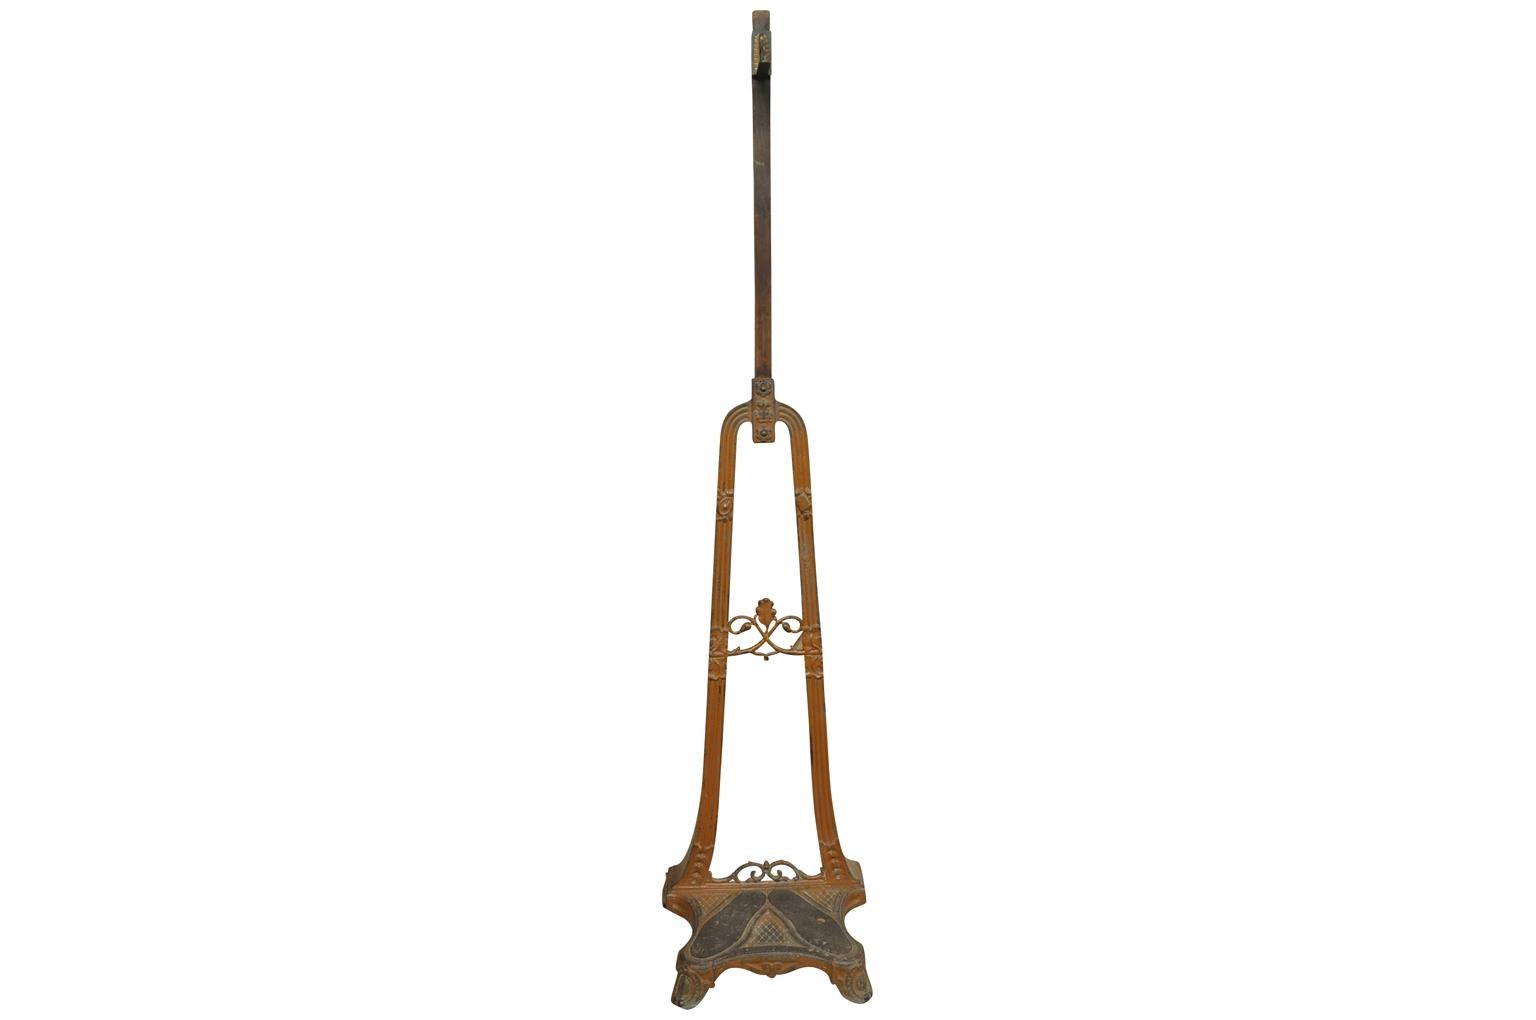 An intriguing 19th century Italian apparatus for measuring one's height in centimeters. Soundly constructed from cast iron with a bronze measure to one side. A whimsical accent perfect for any casual interior.